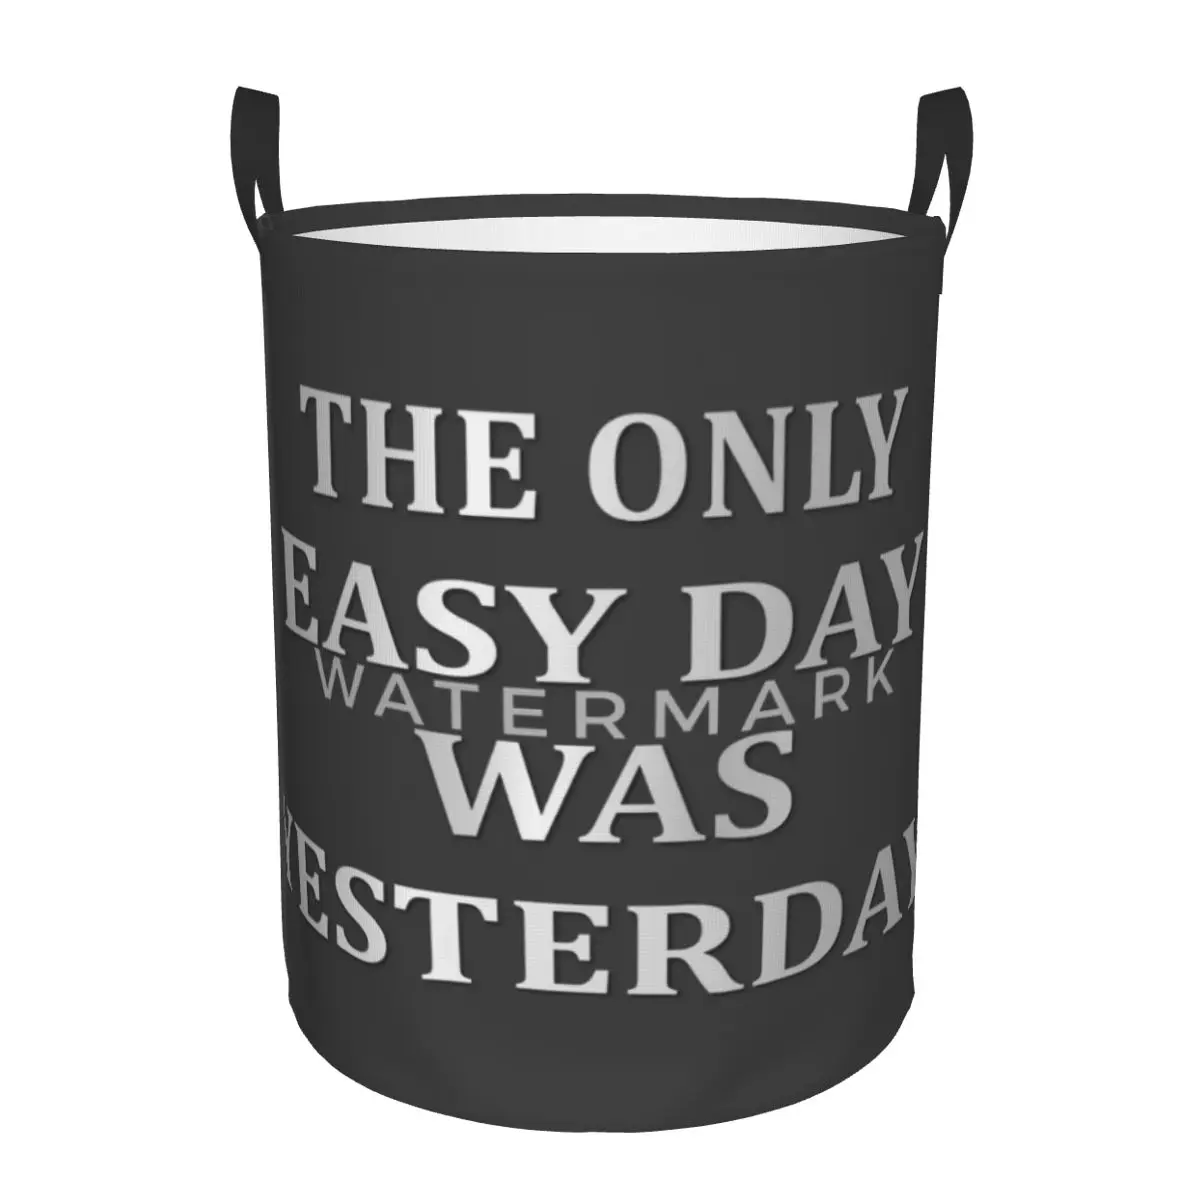 

The Only Easy Day Was Yesterday Circular hamper,Storage Basket Sturdy and durableGreat for kitchensStorage of clothes